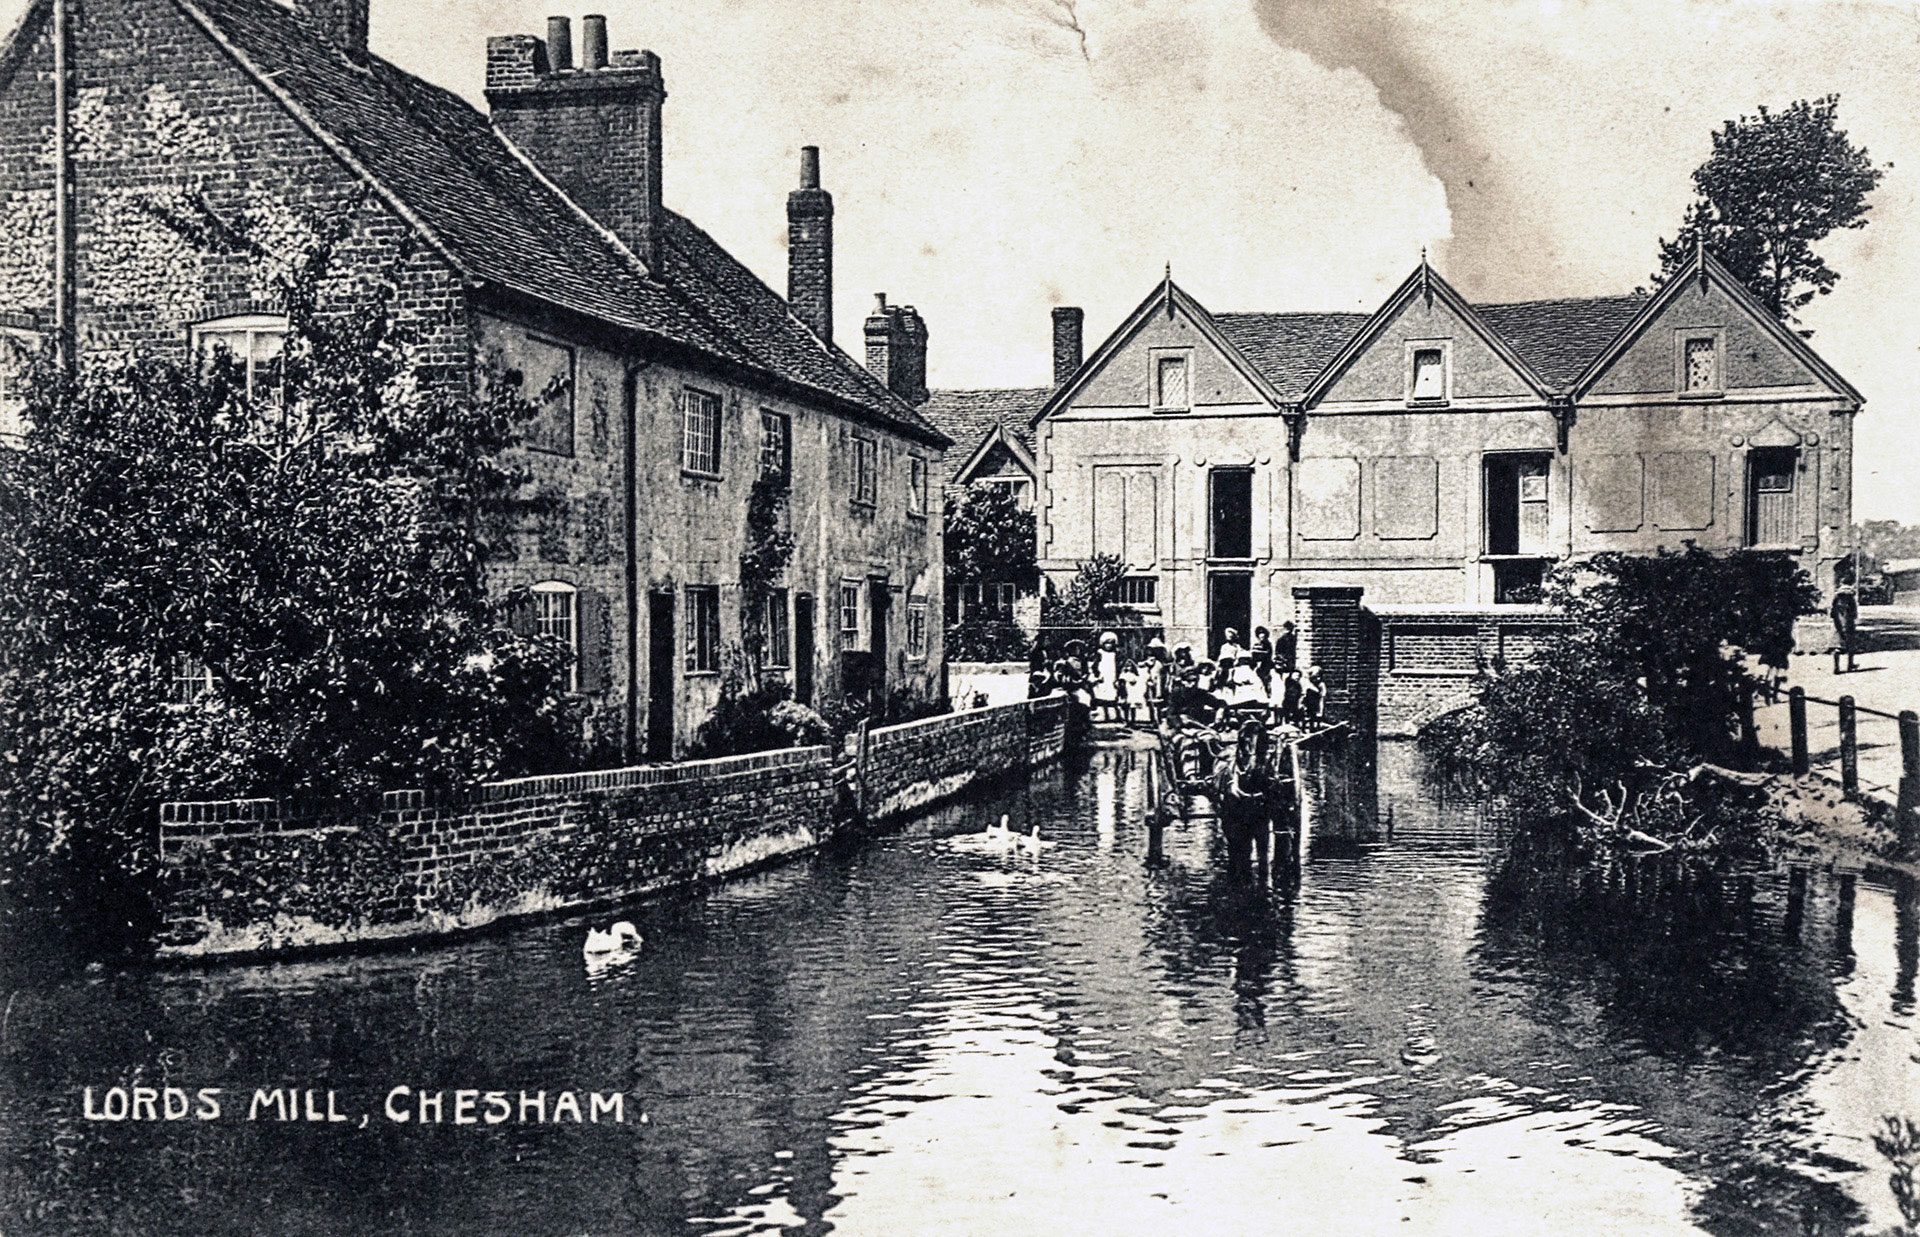 A black and white postcard depicting Lords Mill. Houses surround the water with a horse and cart carrying people travel through.